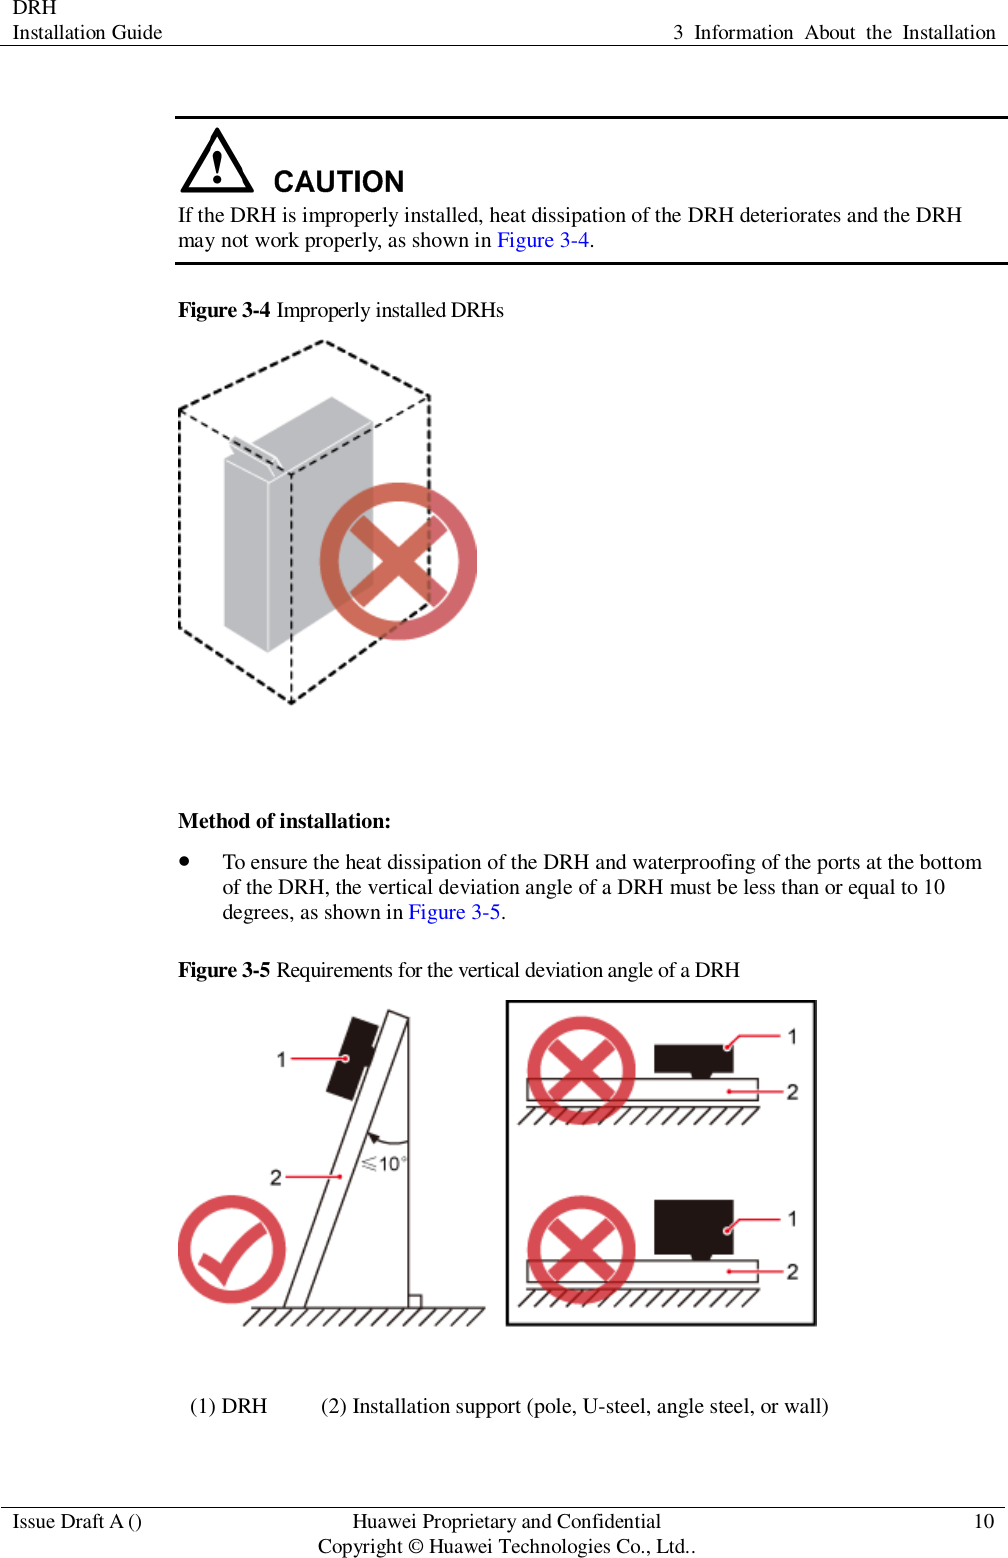 DRH   Installation Guide 3  Information  About  the  Installation  Issue Draft A () Huawei Proprietary and Confidential                                     Copyright © Huawei Technologies Co., Ltd.. 10    If the DRH is improperly installed, heat dissipation of the DRH deteriorates and the DRH may not work properly, as shown in Figure 3-4. Figure 3-4 Improperly installed DRHs   Method of installation:  To ensure the heat dissipation of the DRH and waterproofing of the ports at the bottom of the DRH, the vertical deviation angle of a DRH must be less than or equal to 10 degrees, as shown in Figure 3-5. Figure 3-5 Requirements for the vertical deviation angle of a DRH  (1) DRH (2) Installation support (pole, U-steel, angle steel, or wall)  